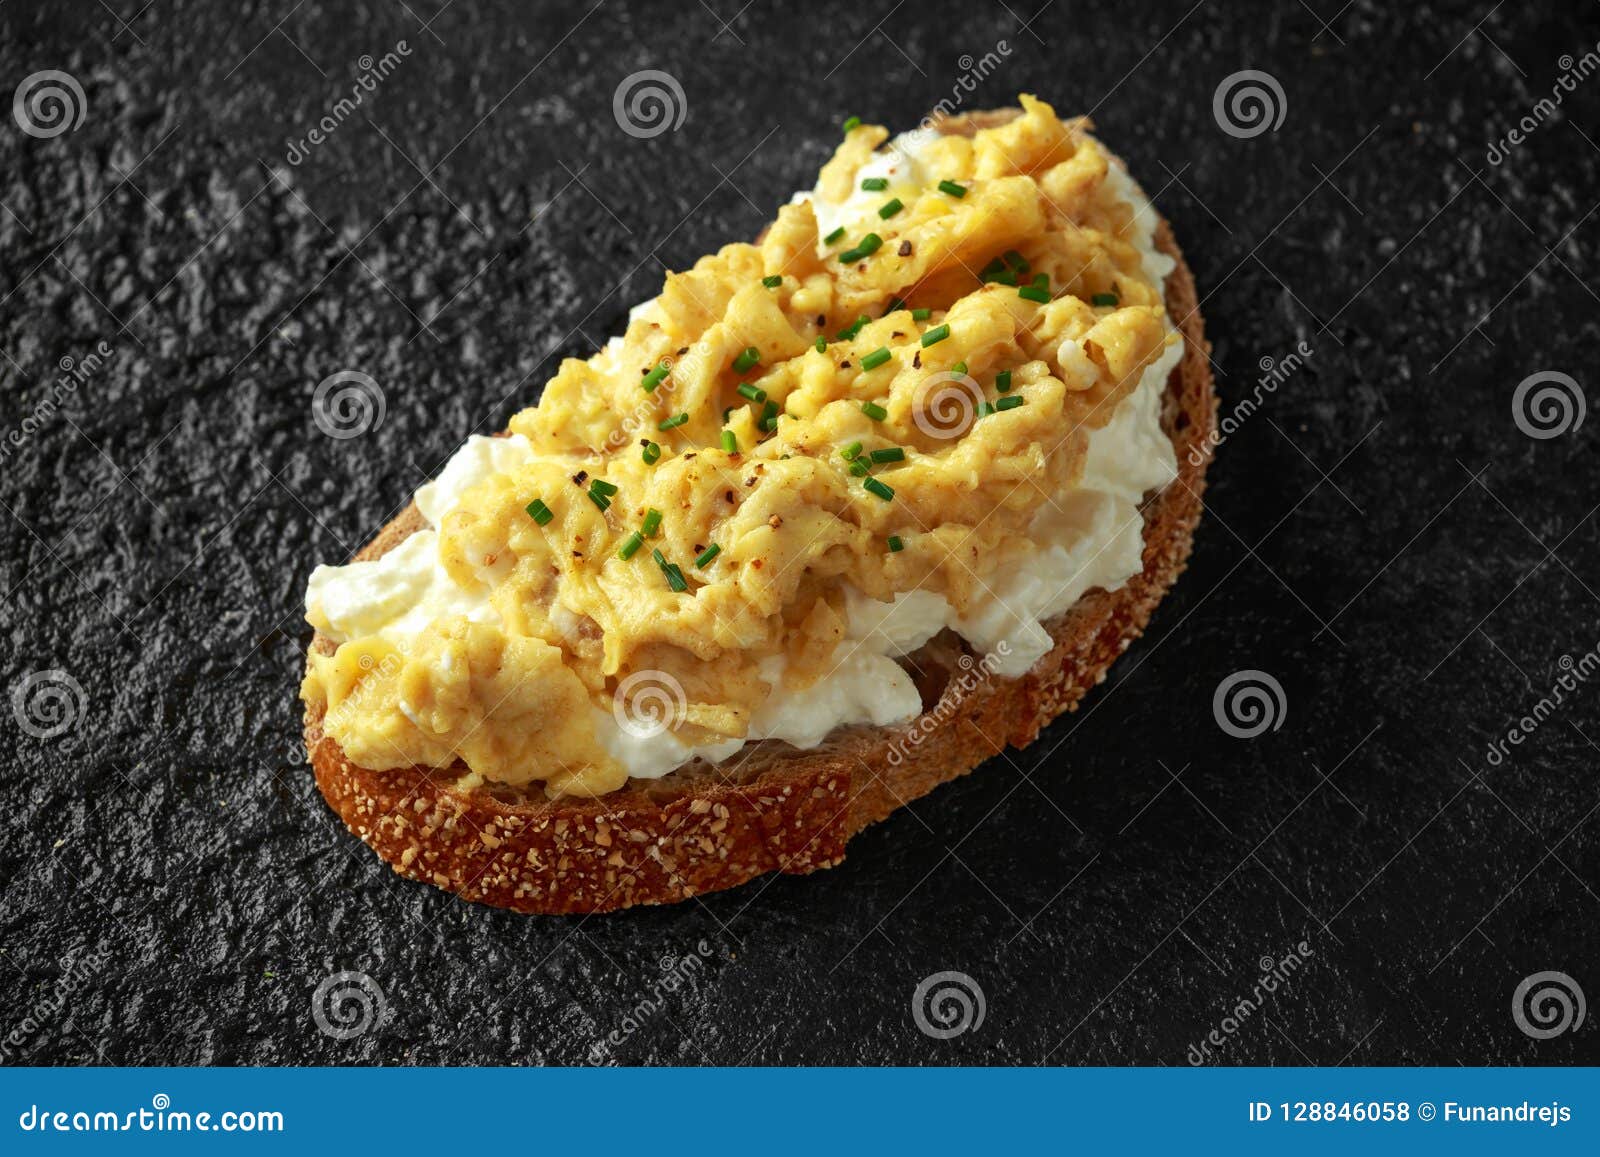 Vegetarian Healthy Bread Toasts With Cottage Cheese Scrambled